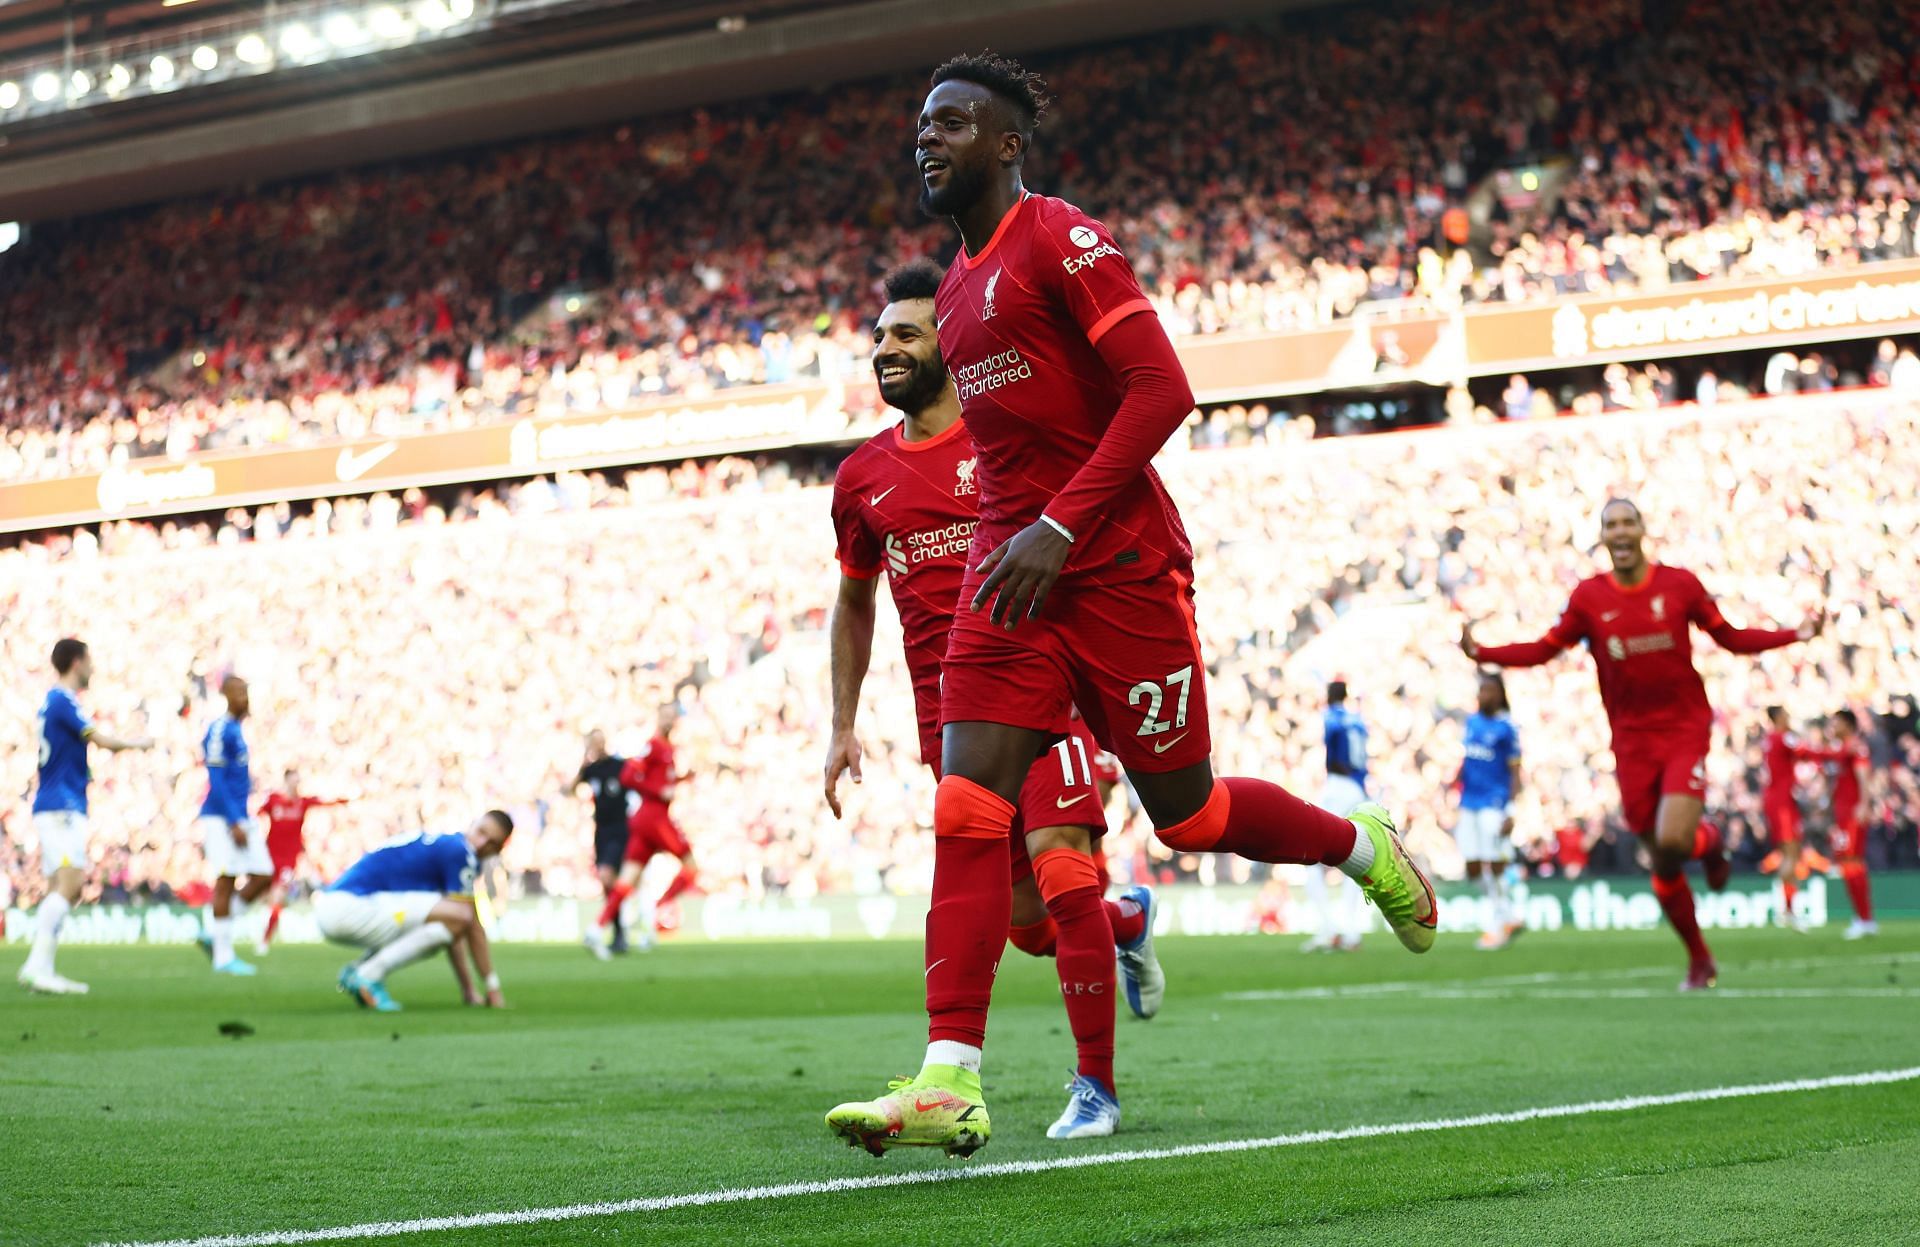 Origi could play his last game for Liverpool in the Champions League final